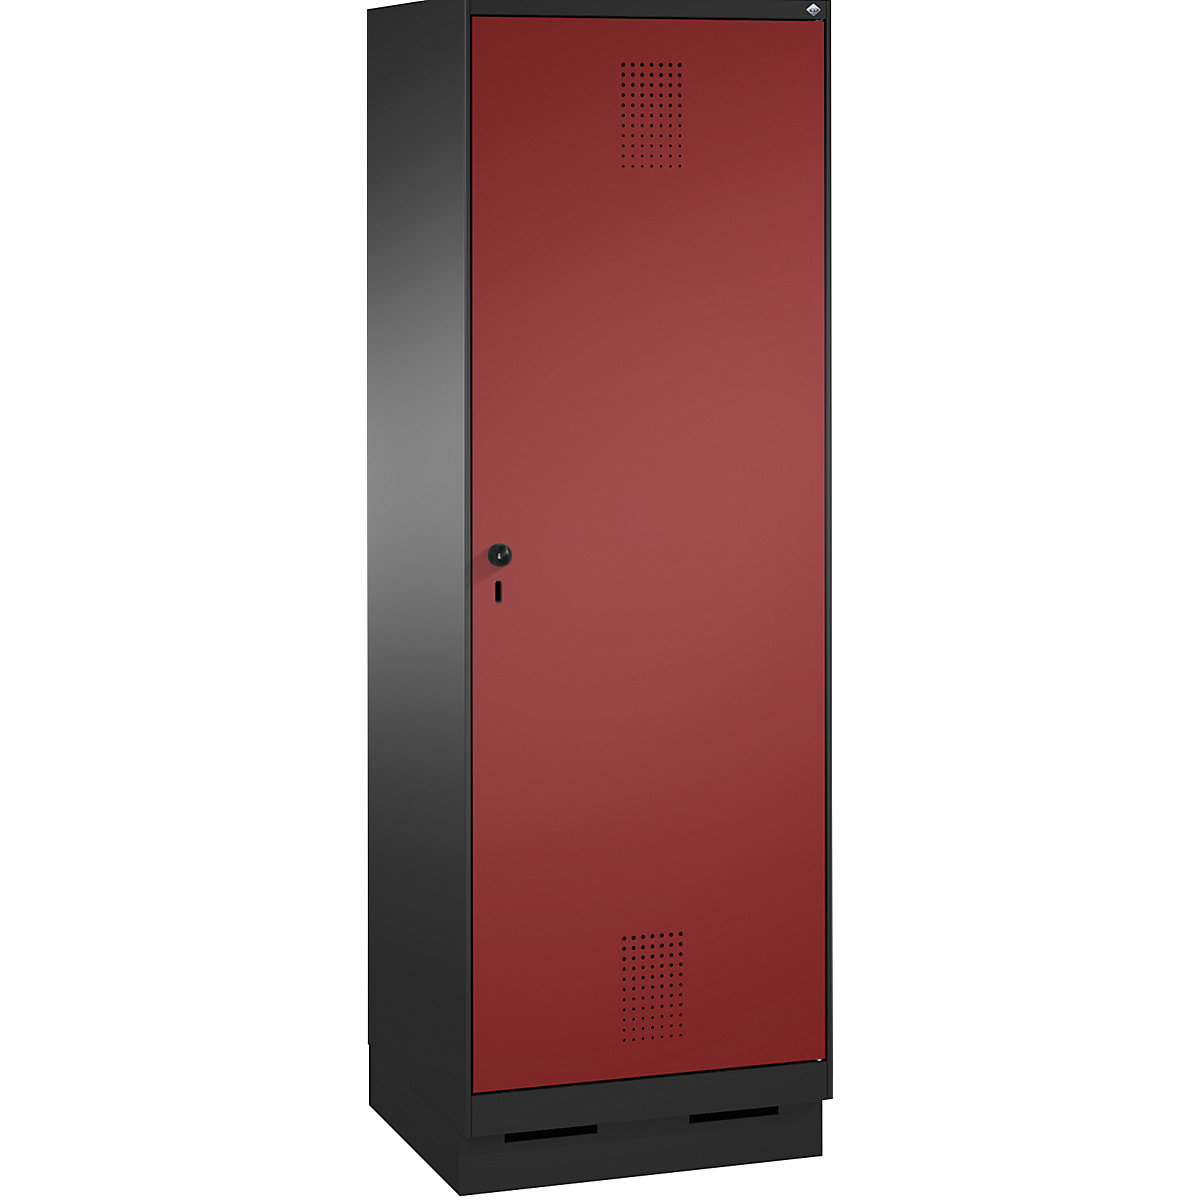 EVOLO cloakroom locker, door for 2 compartments, with plinth – C+P, 2 compartments, 1 door, compartment width 300 mm, black grey / ruby red-7